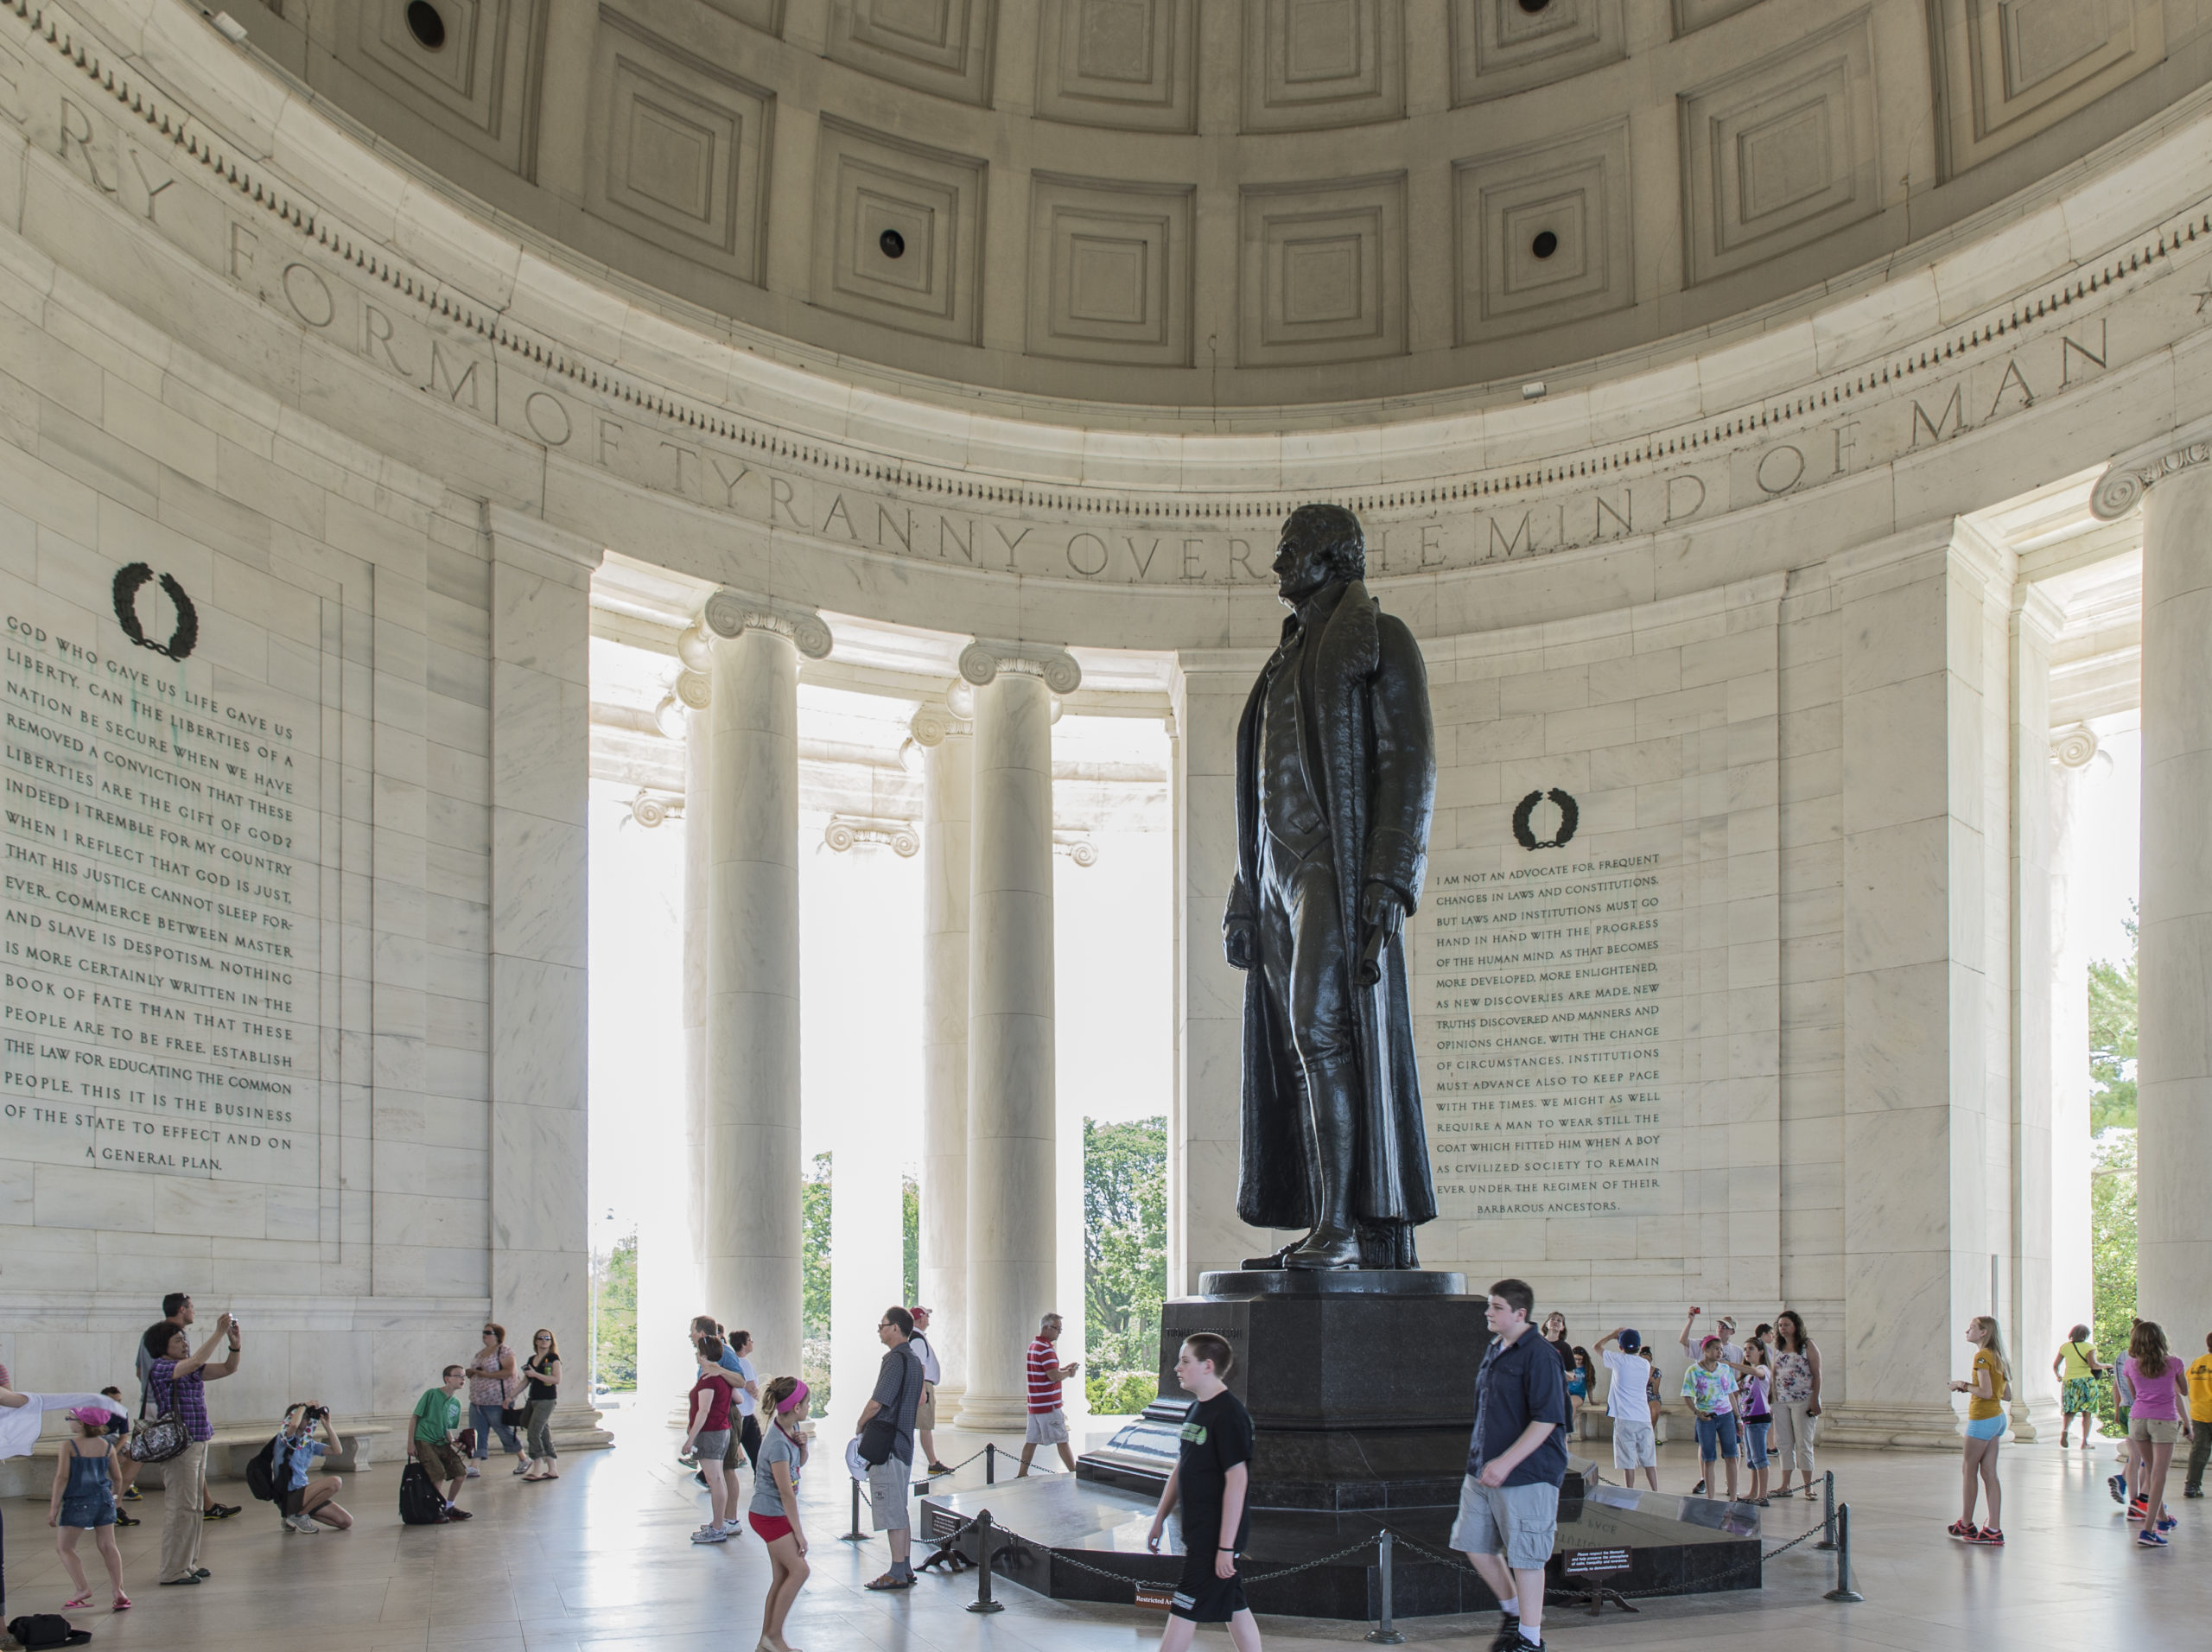 Interior of the Jefferson Memorial with tourists